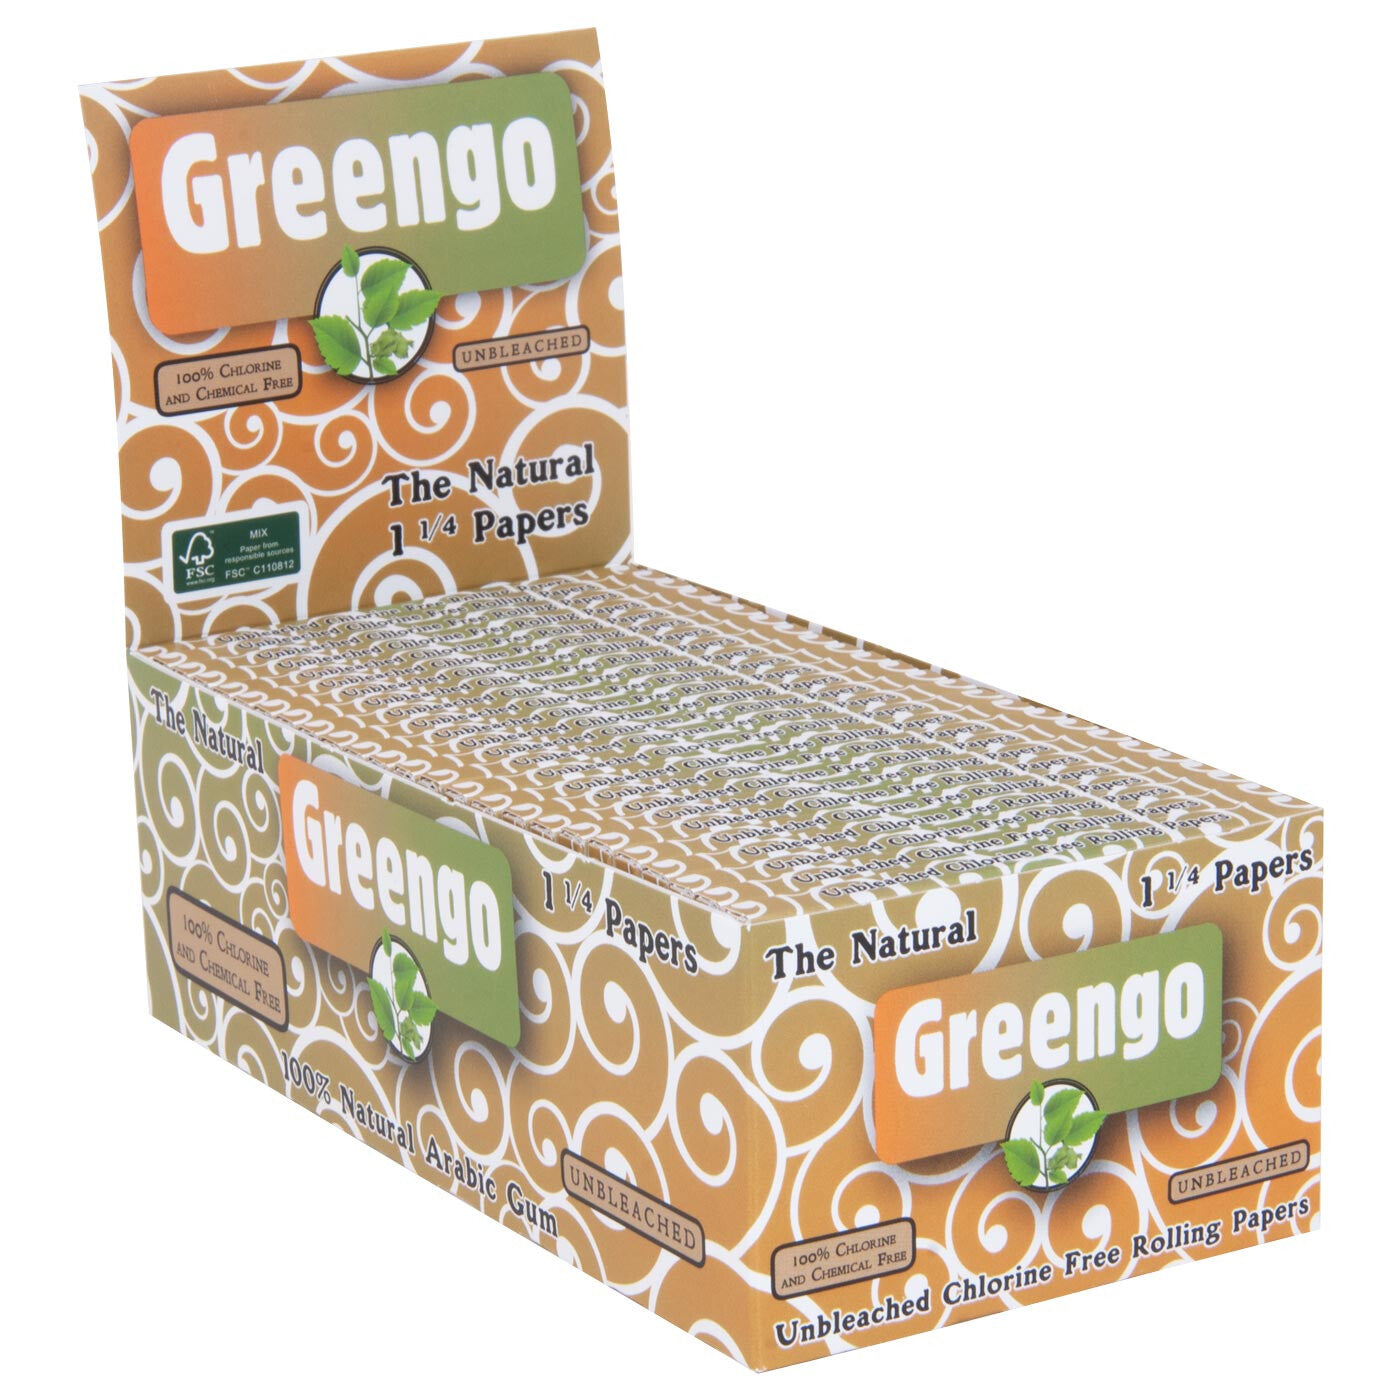 Display Greengo Unbleached 1 1/4 Papers 50 Pcs